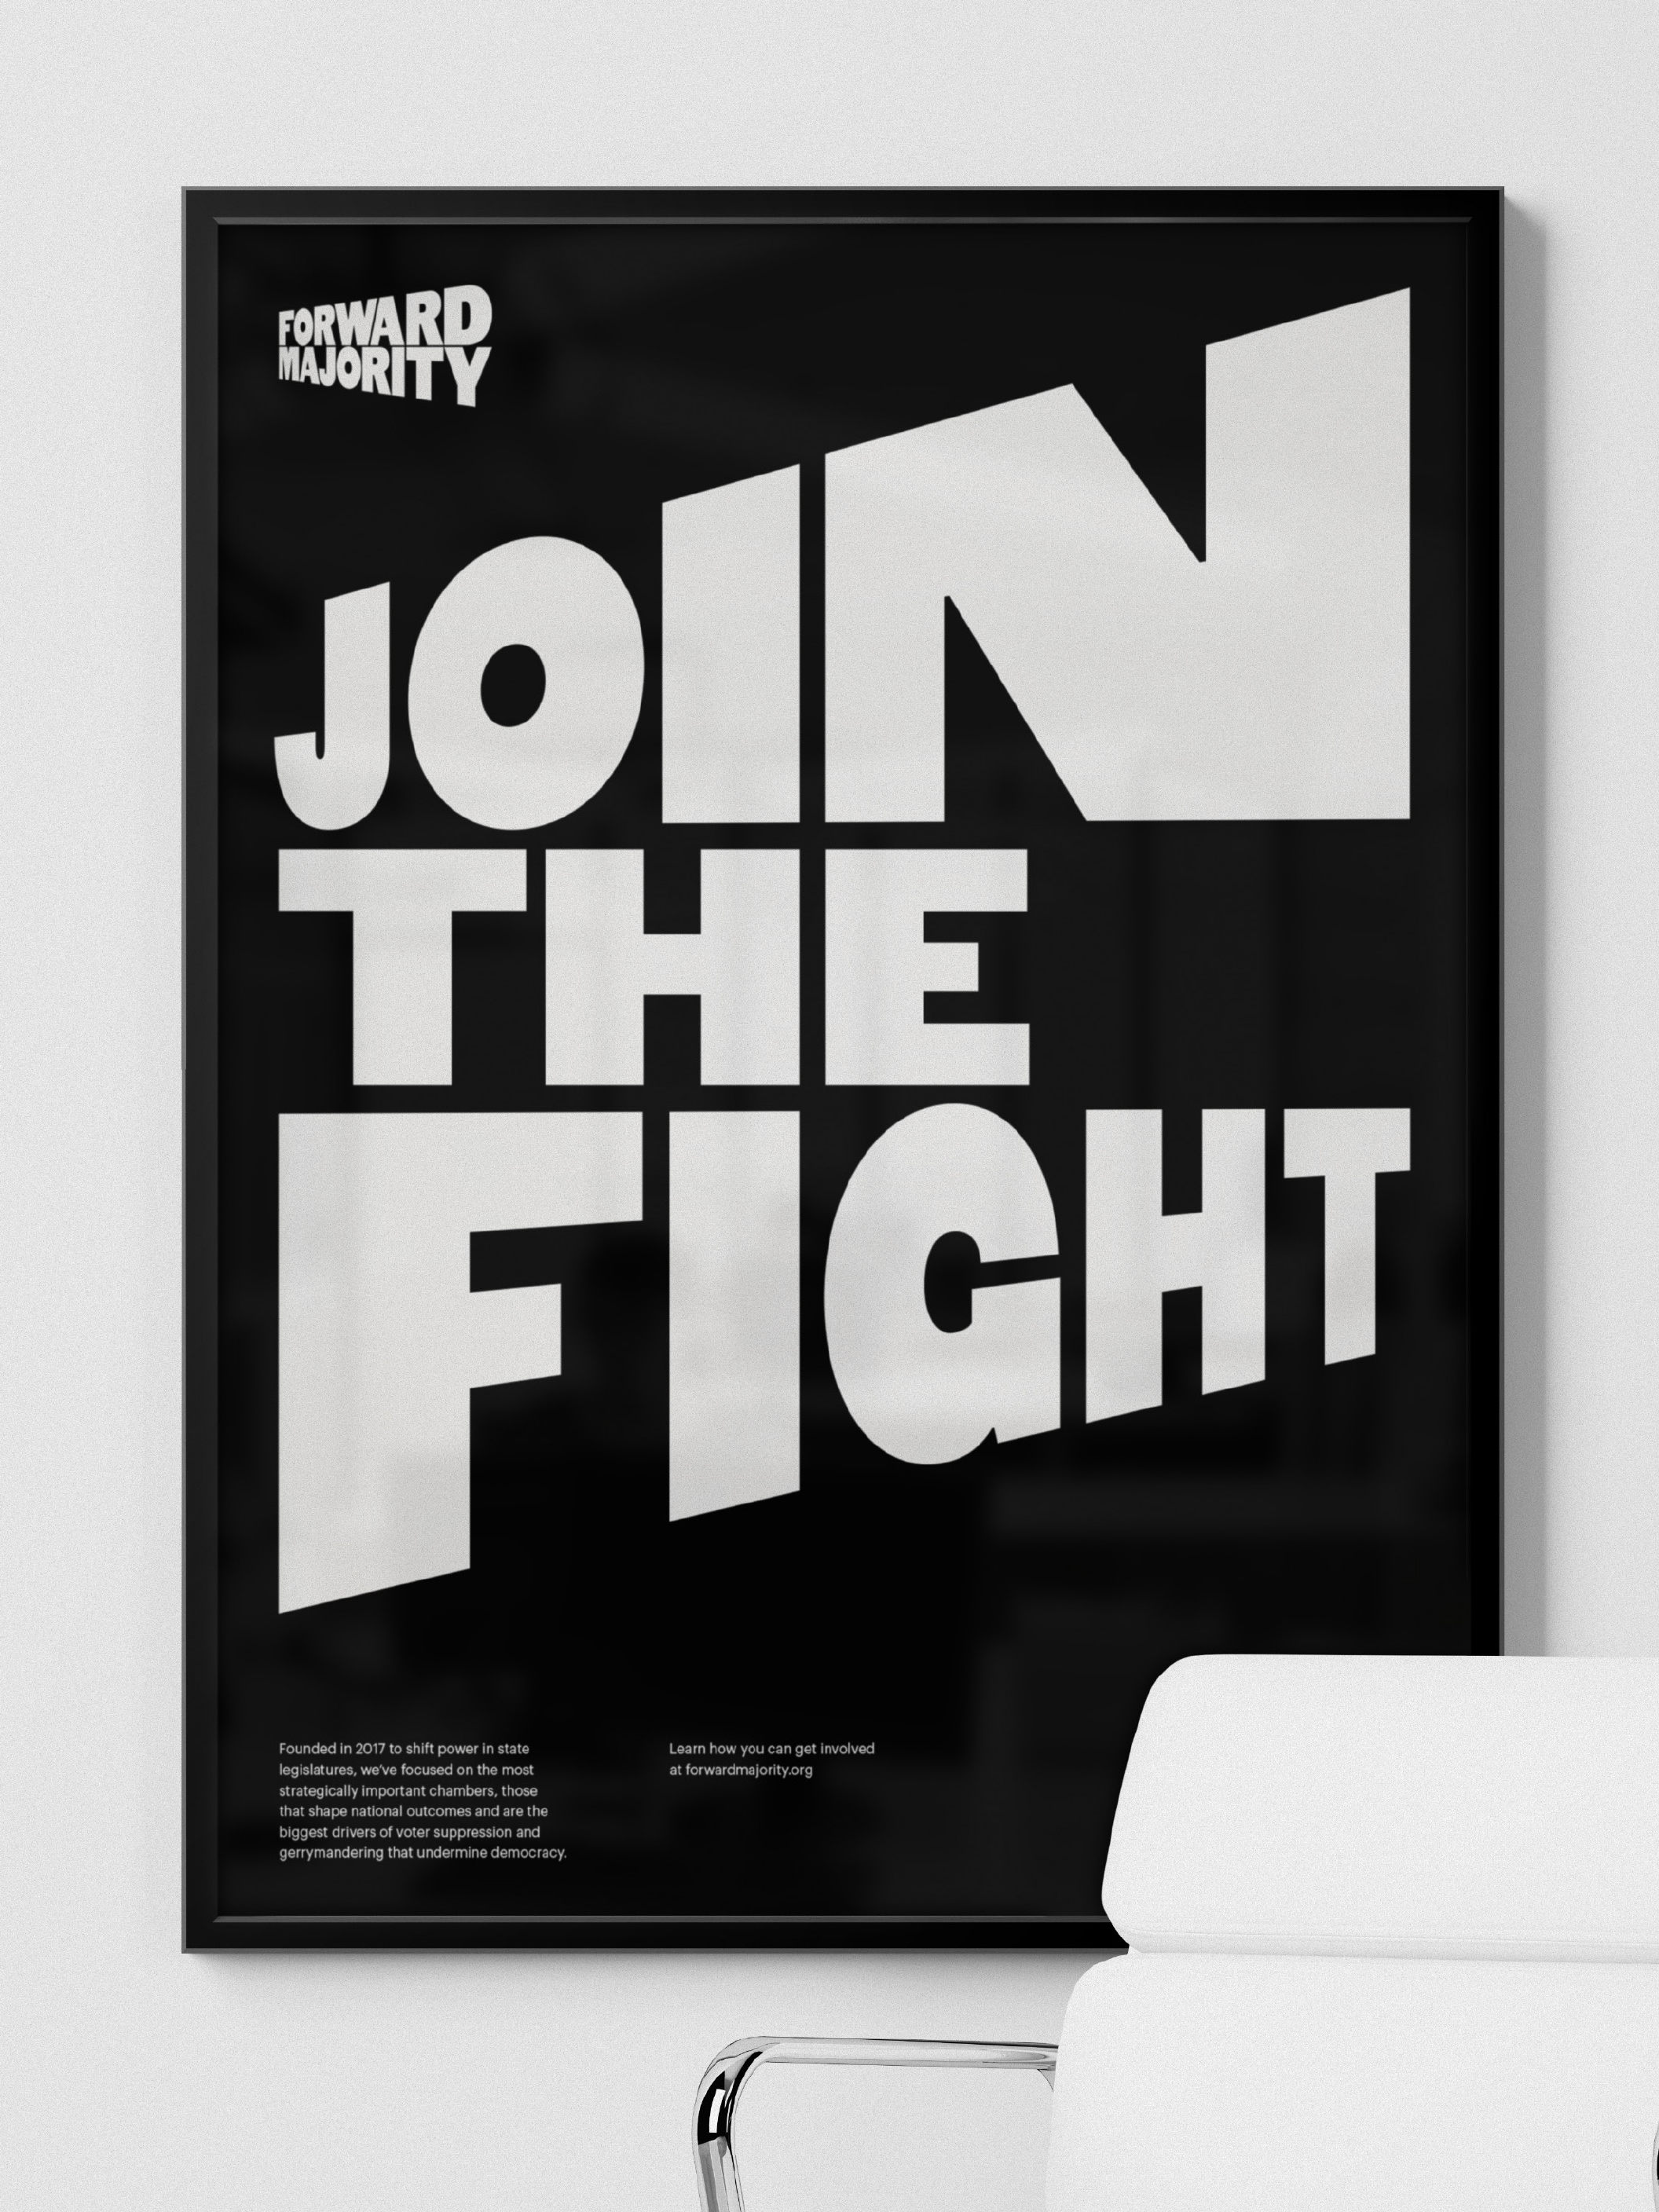 Visual identity and poster for political action committee Forward Majority designed by New York-based studio Order